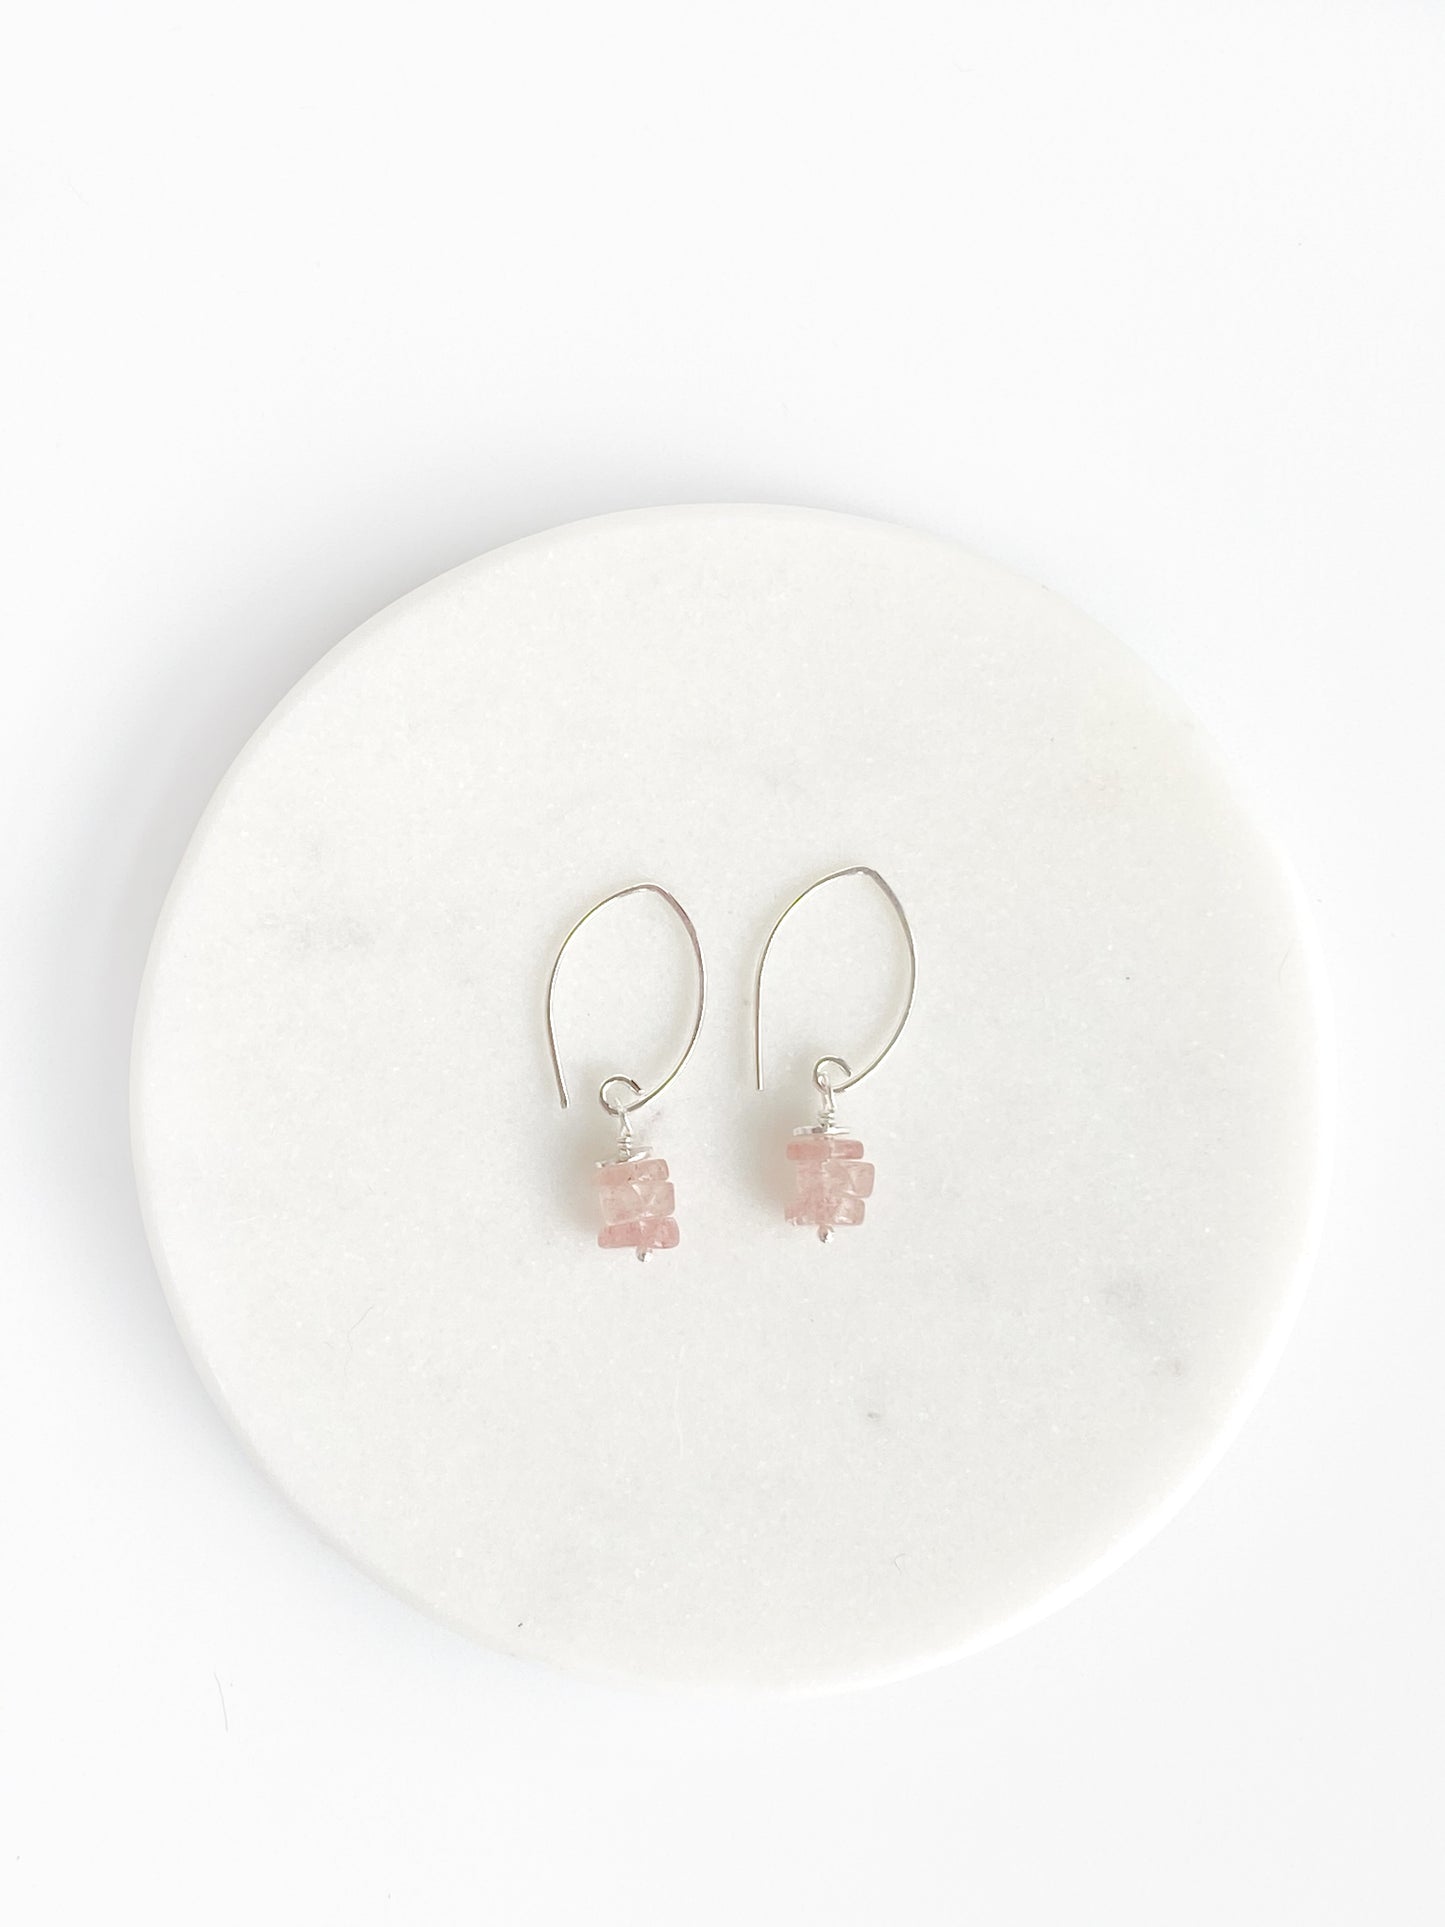 Strawberry Quartz and sterling silver earrings. Almond shaped sterling handmade ear wires with 3 strawberry quartz heishi beads and a round silver spacer bead. They measure 1 1/4 inches